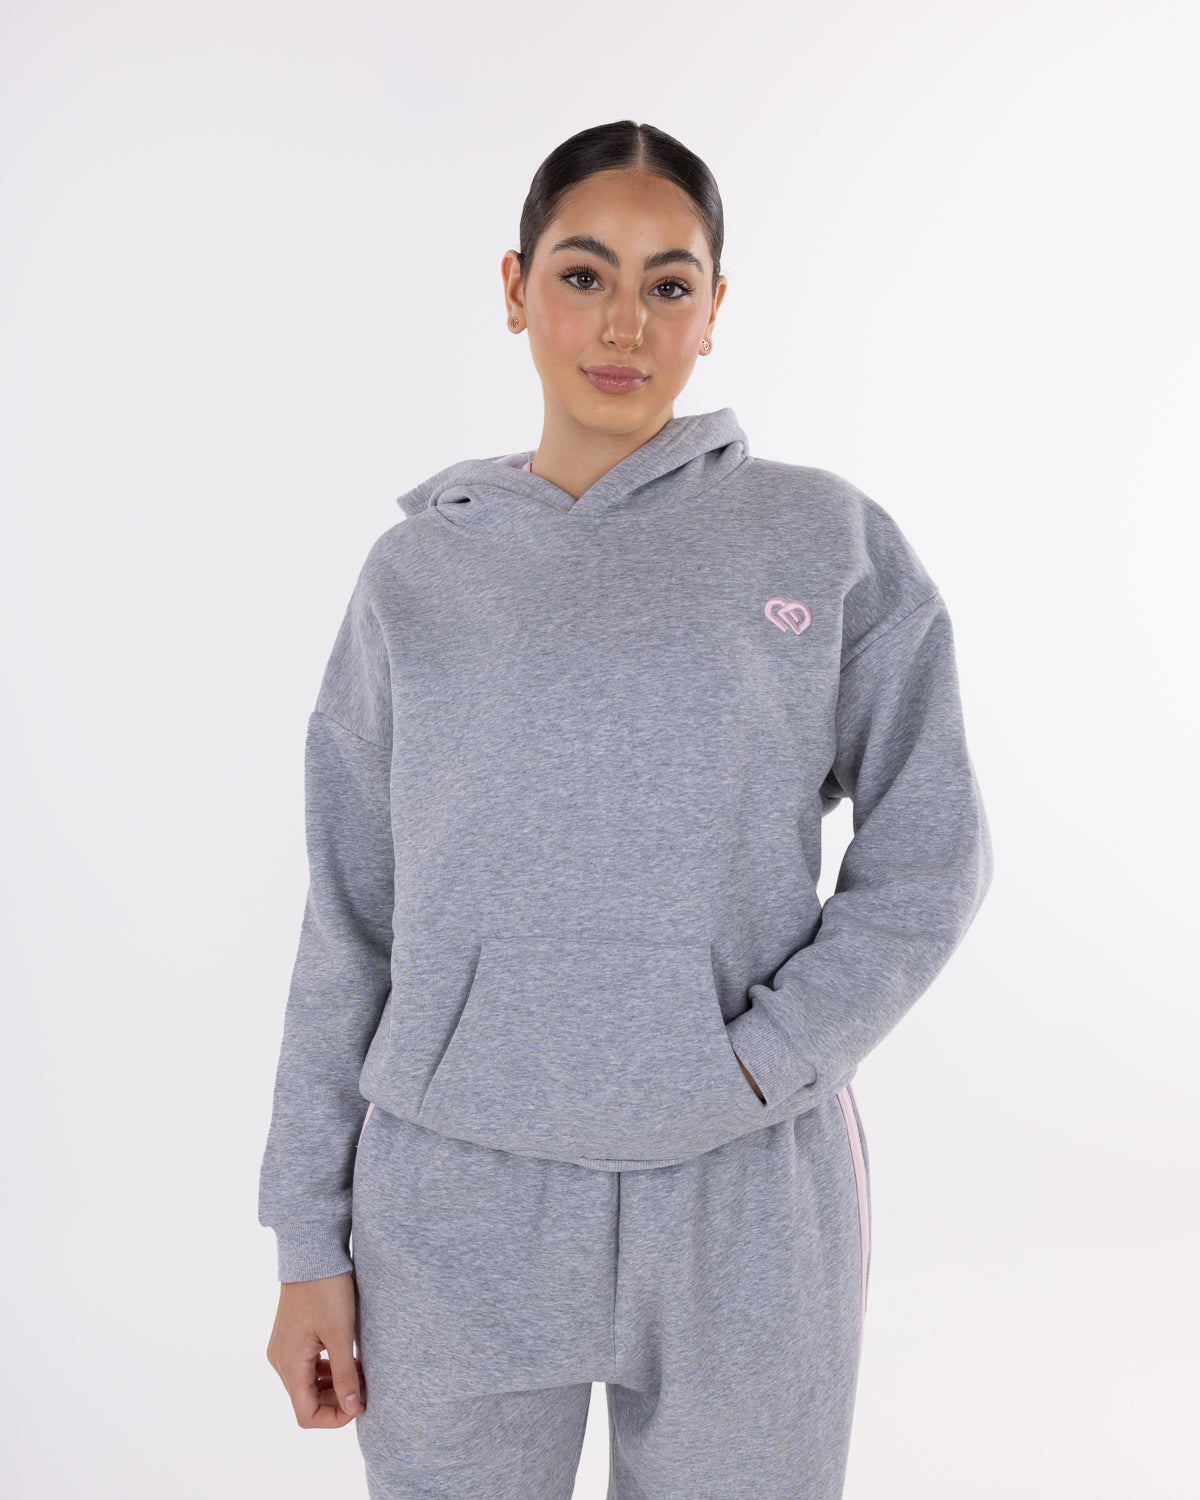 Claudia Dean World - My dance-wear brand @collectionsbyclaudia has just  revealed our BRAND NEW, FLORAL COLLECTION! 🌸🌷We have so much more to  reveal, as well as incredible giveaways too😱 Make sure you